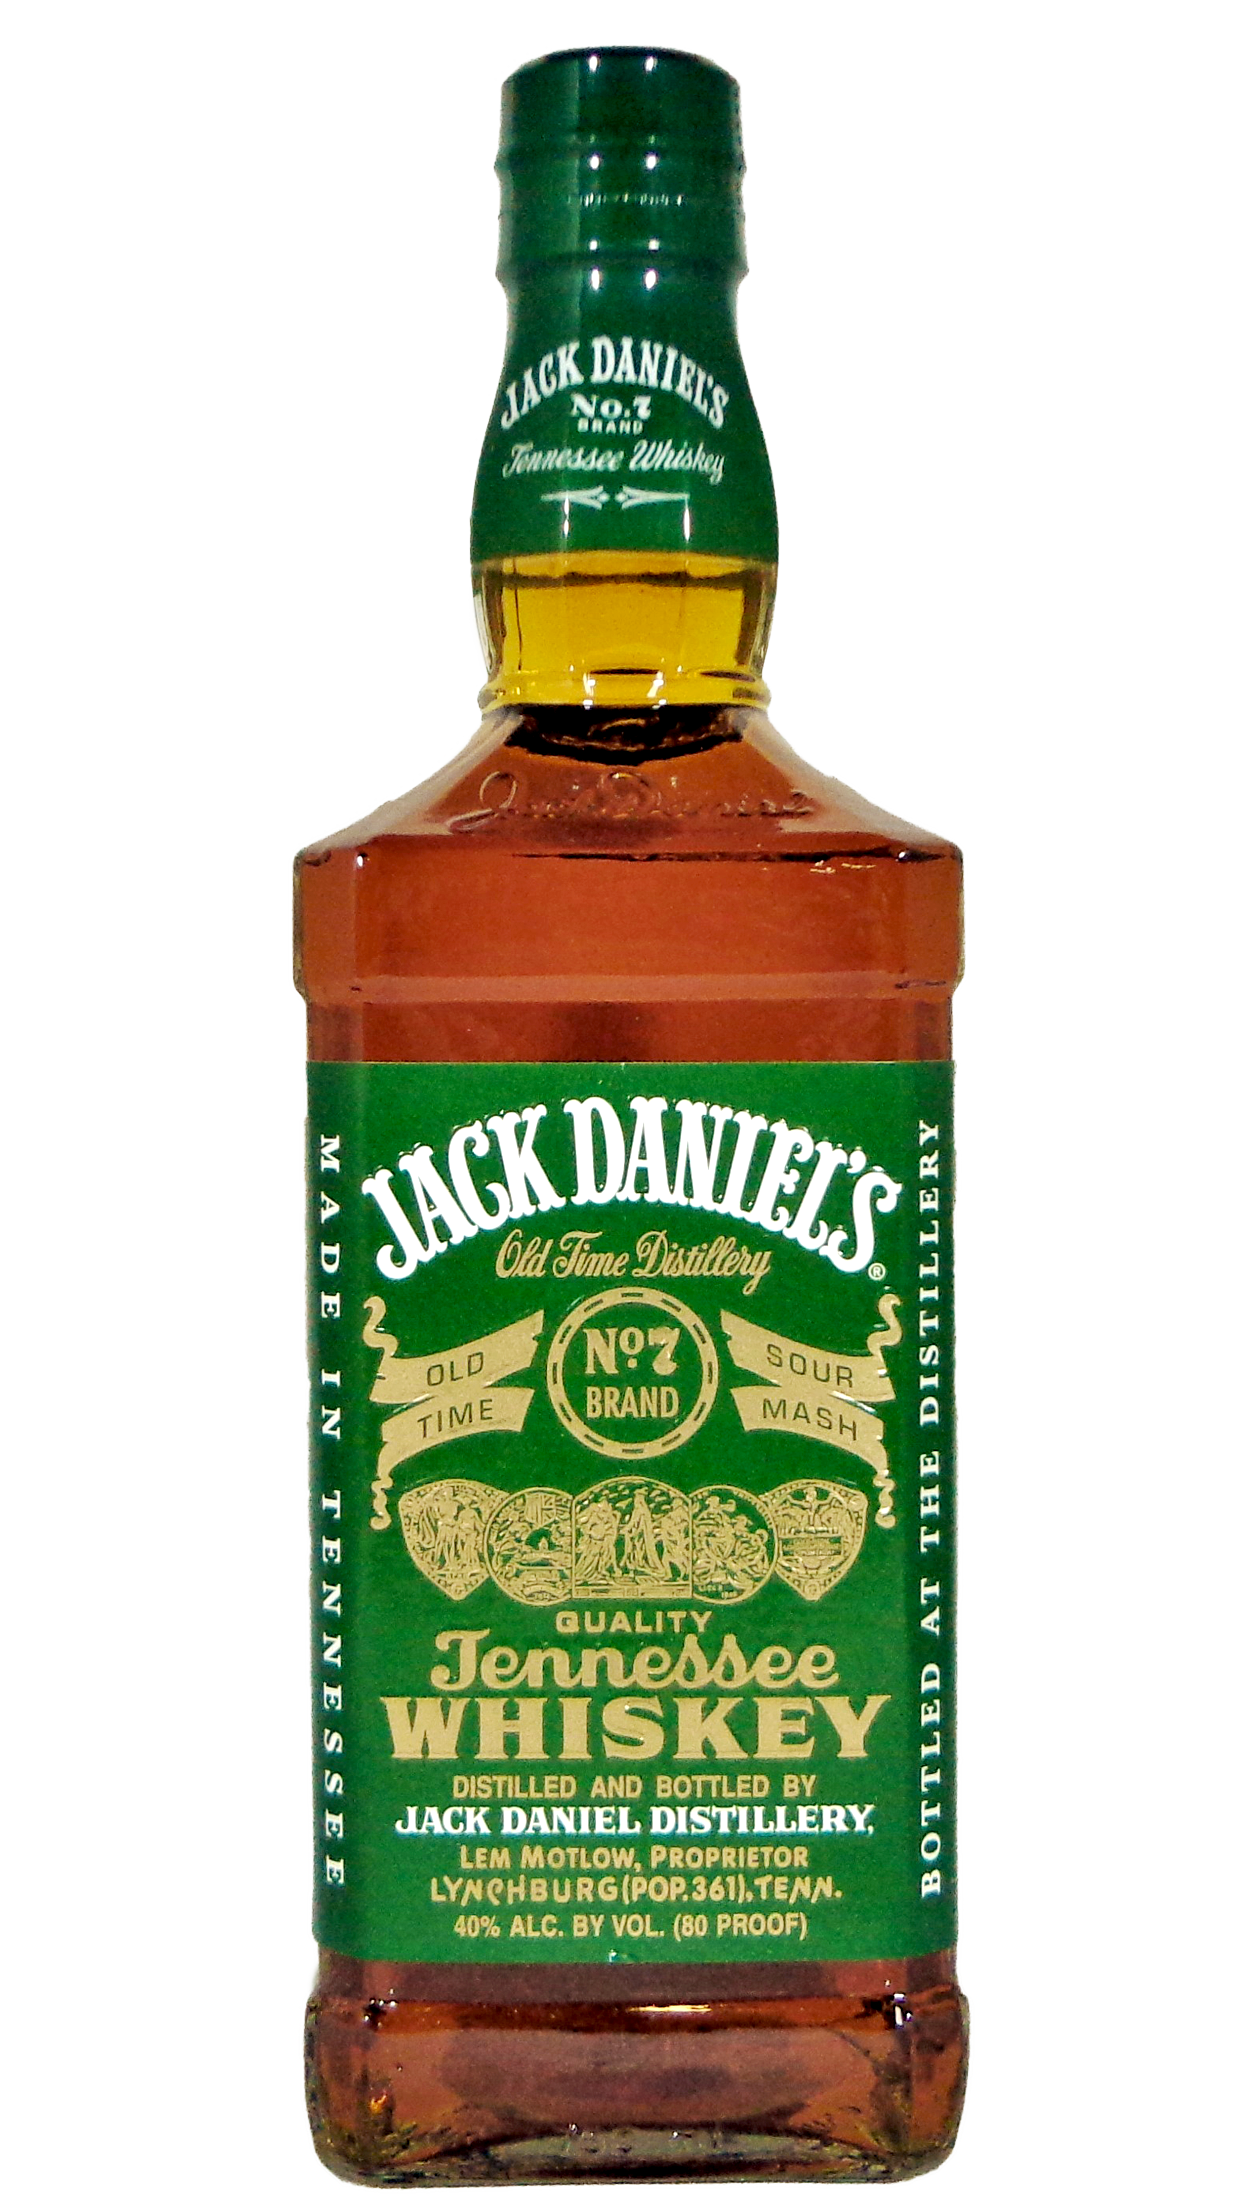 BUY] Jack Daniel's Old No. 7 Green Label Sour Mash Tennessee Whiskey at